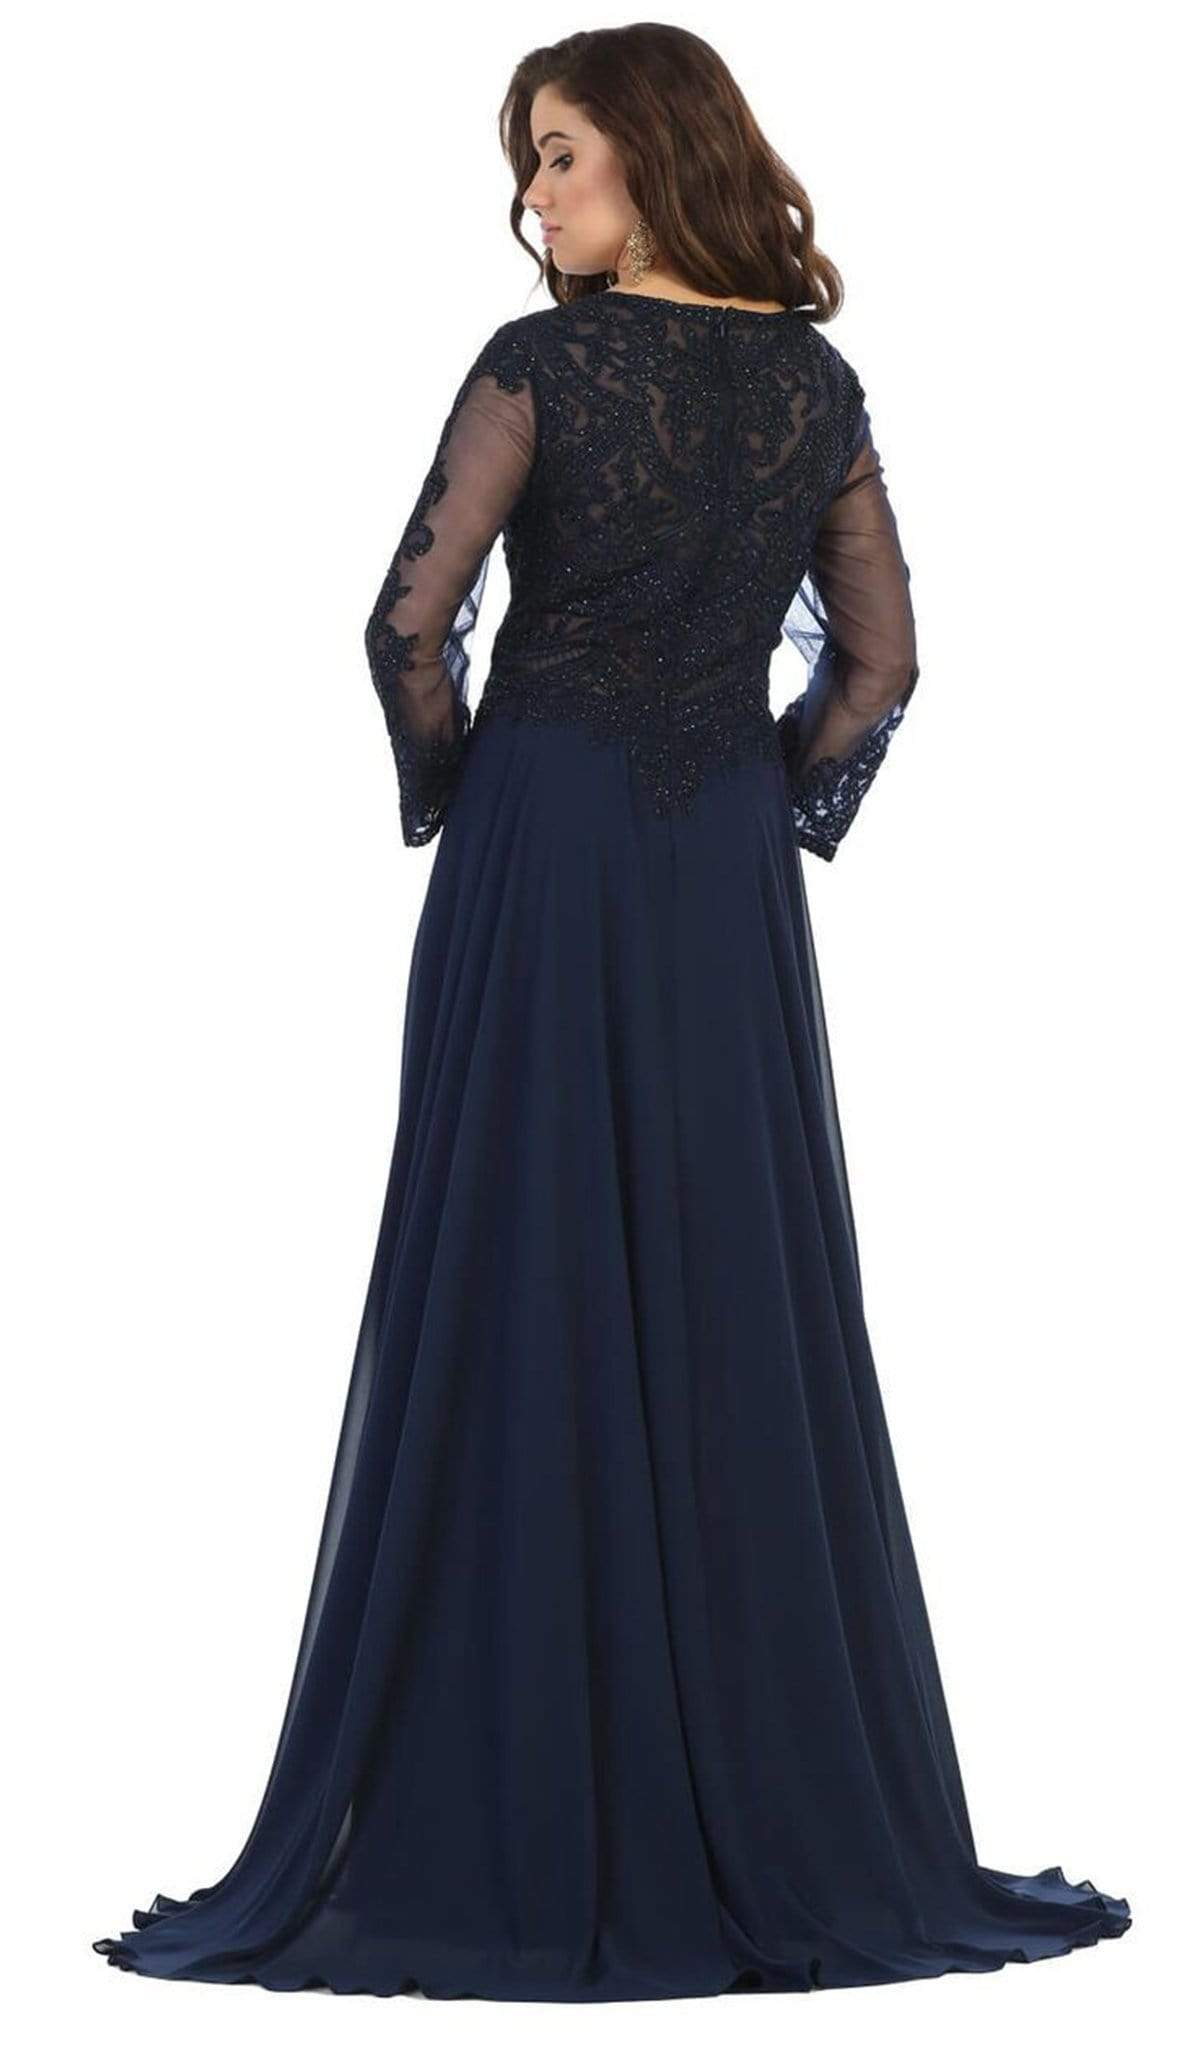 May Queen - MQ1615B Applique Long Sleeve A-line Dress In Blue